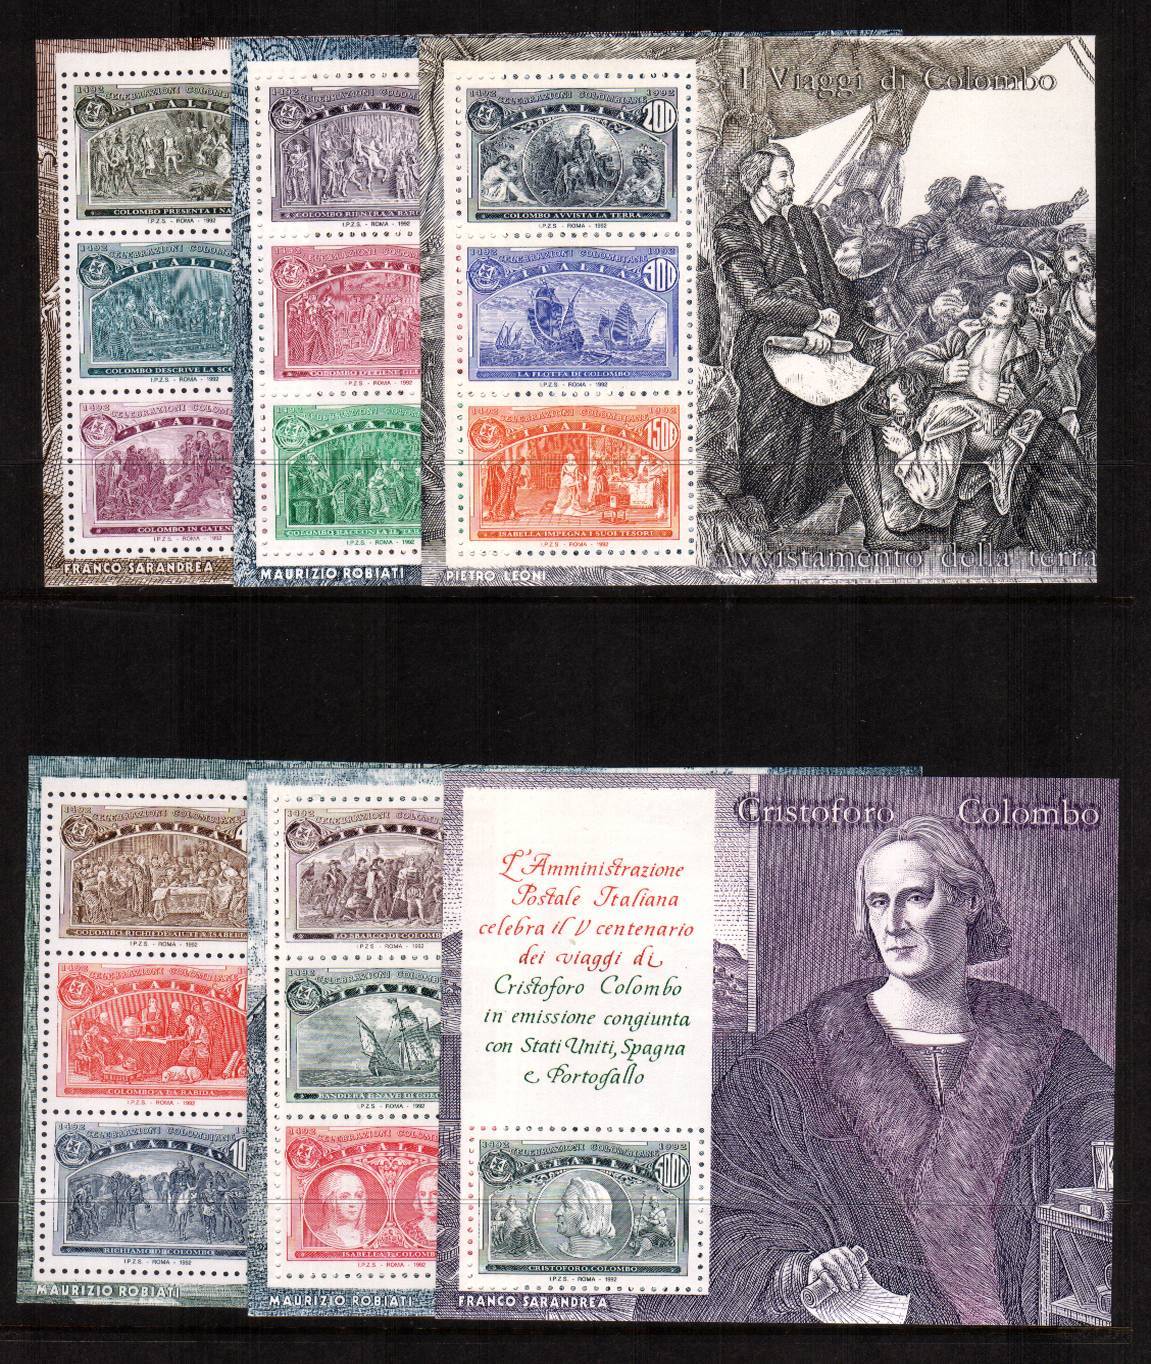 500th Anniversary of Discovery of America by Columbus<br/>
A superb unmounted mint set of six minisheets. SG Cat 44